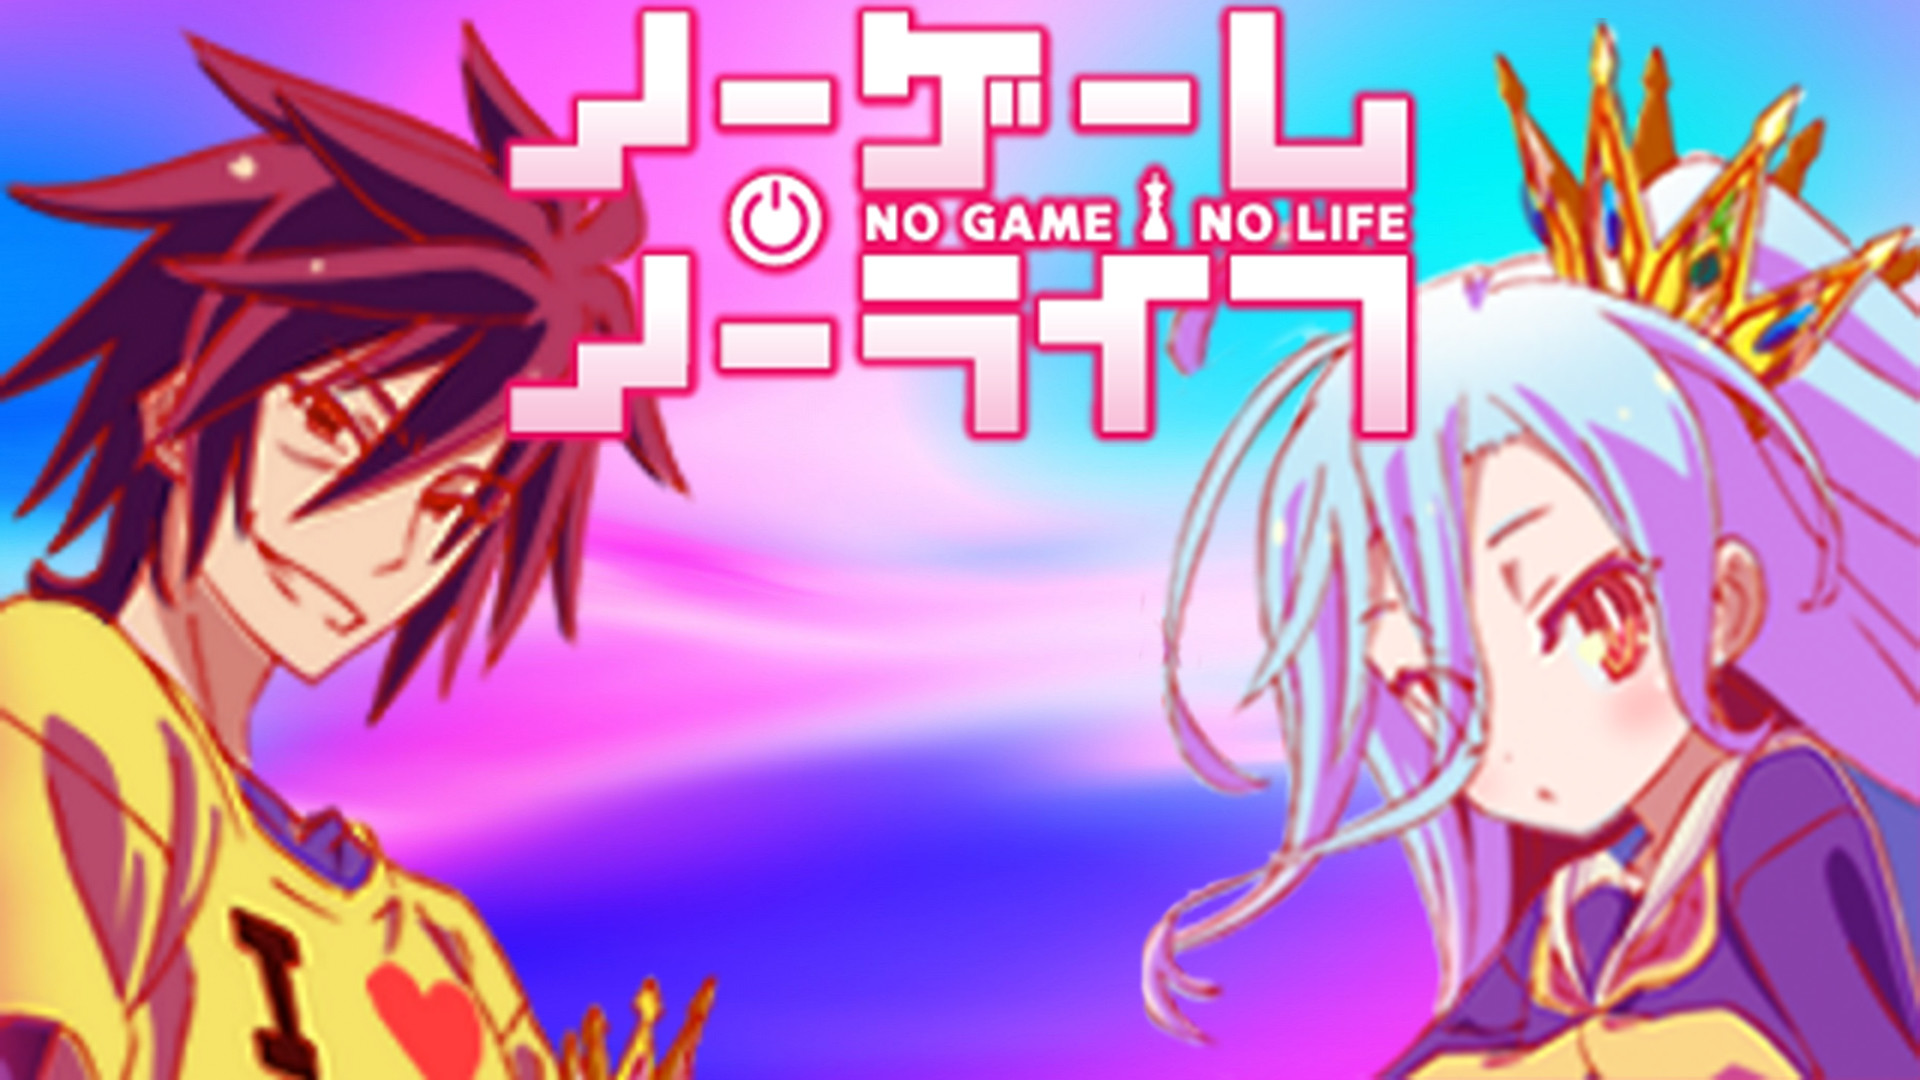 1920x1080 ... No Game No Life | We Are Blank Wallpaper V2 by Crawdunk